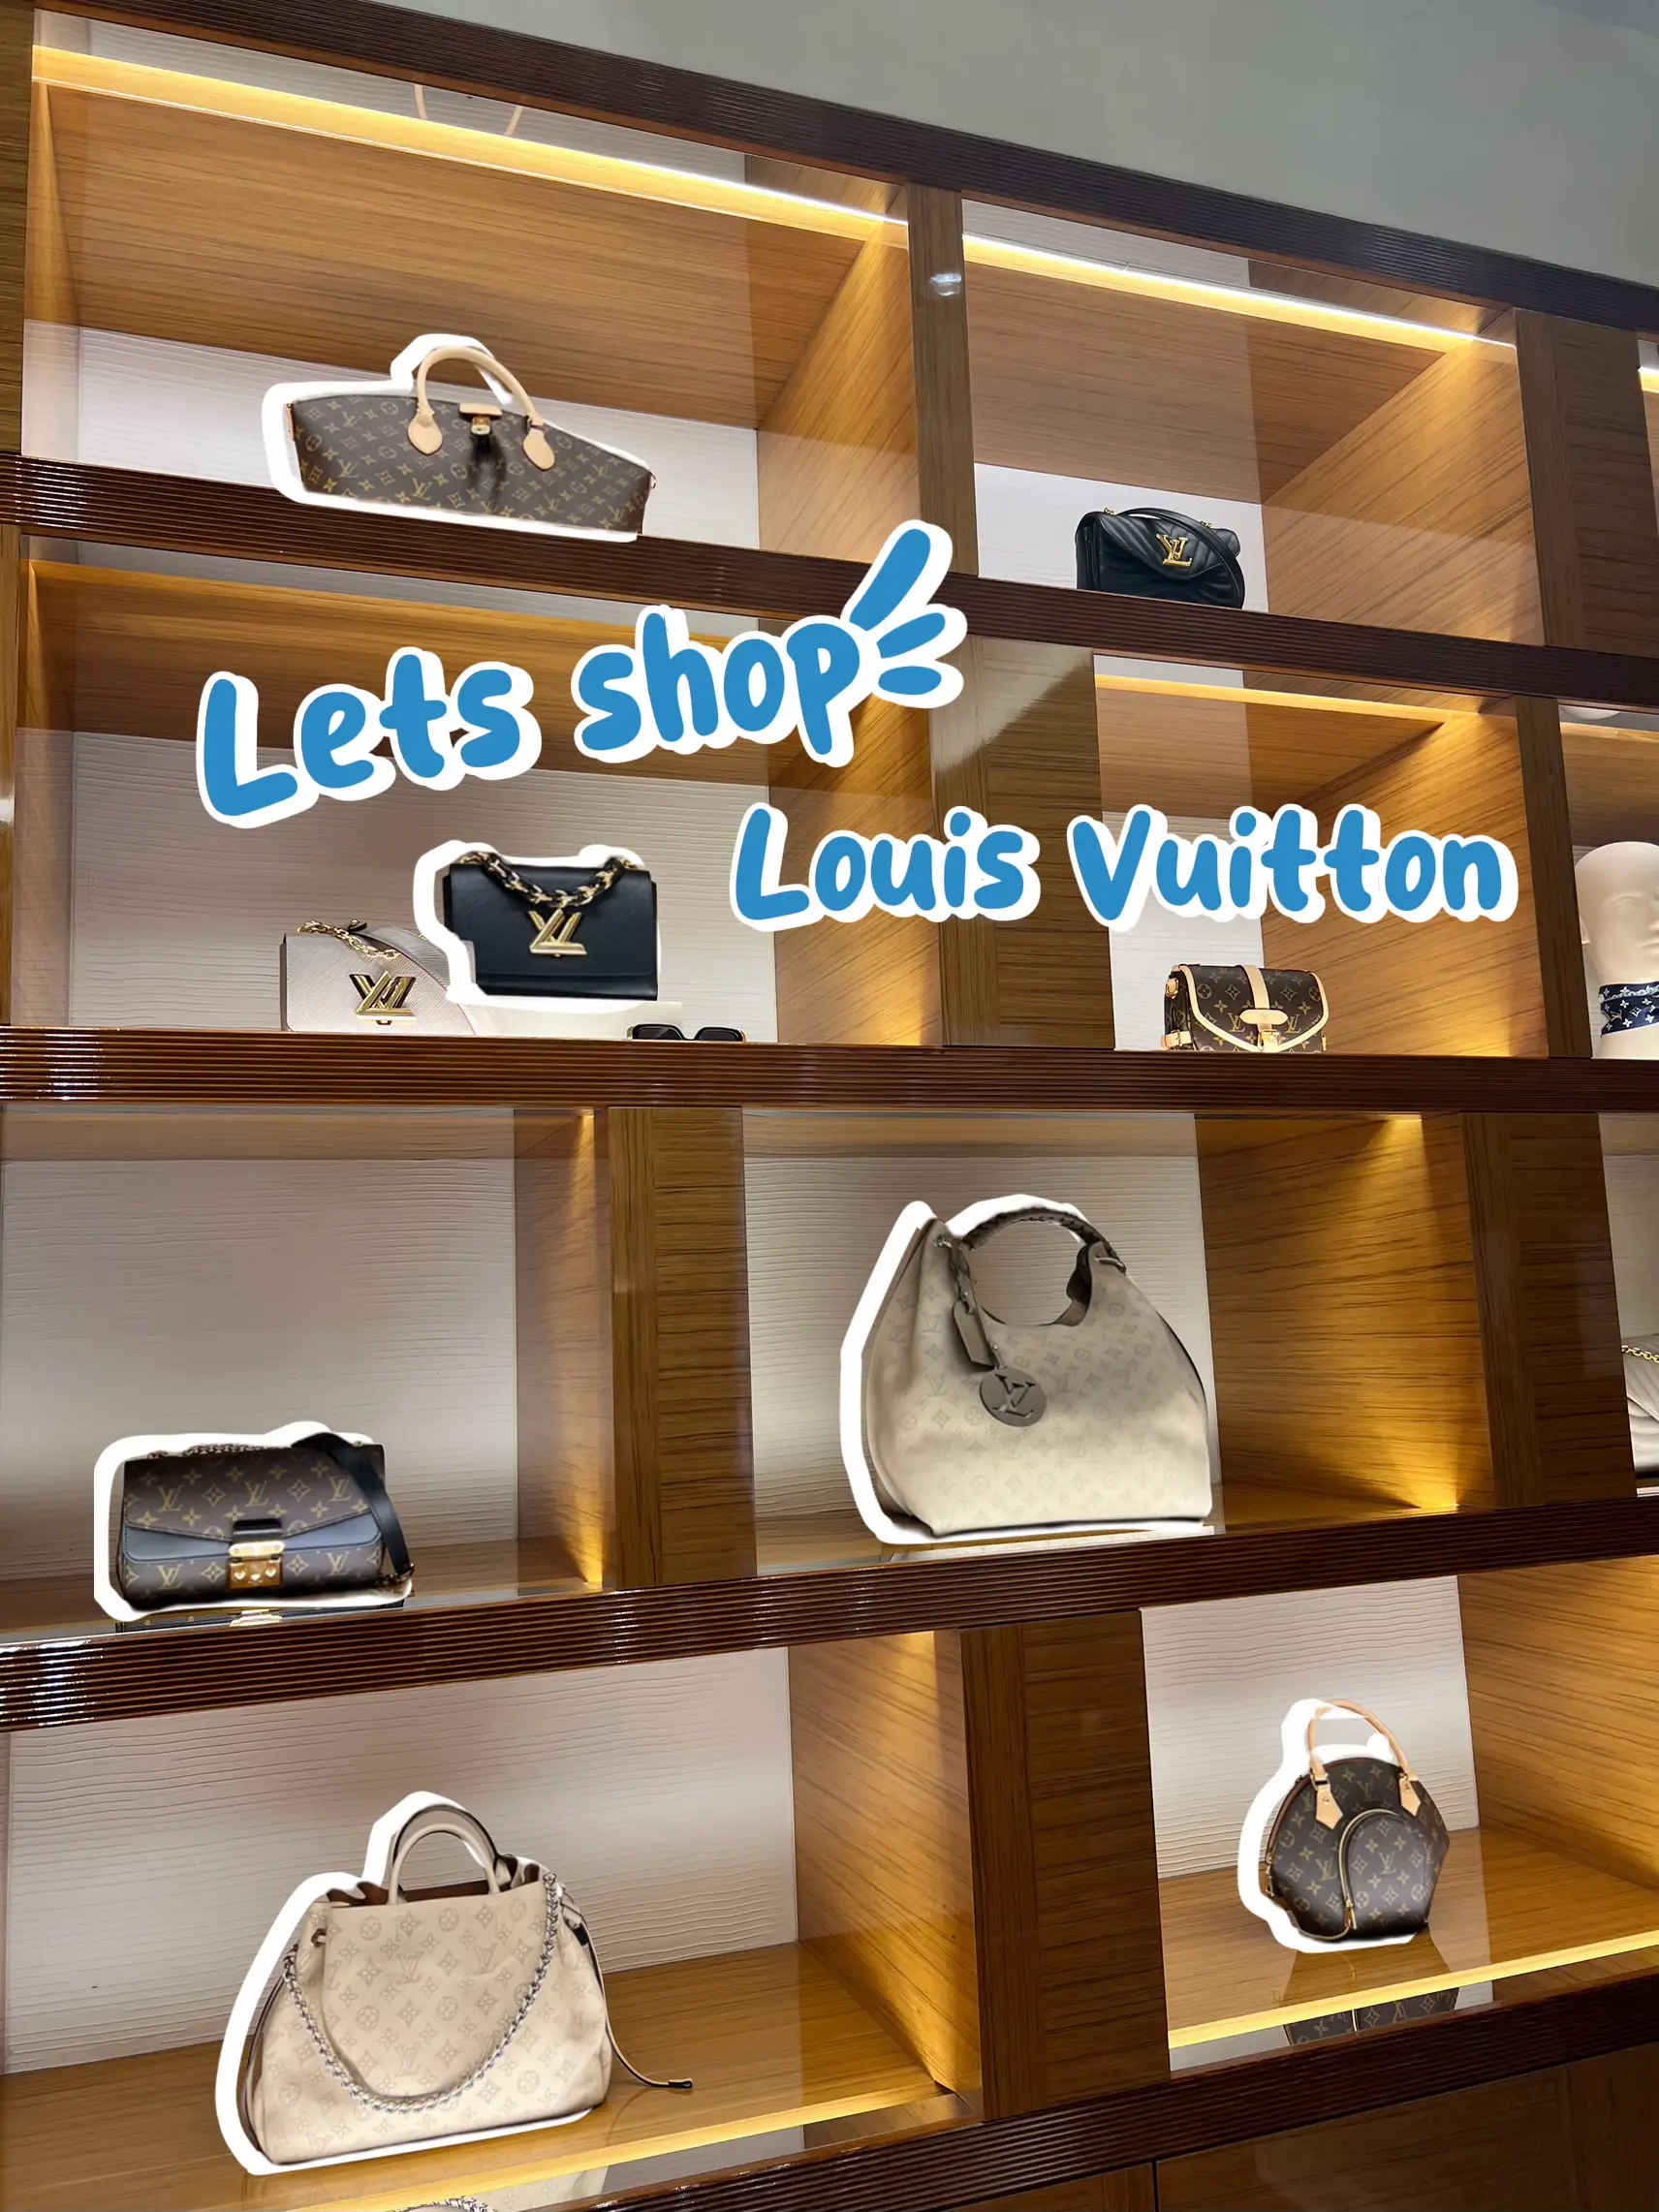 Let's Dupe the Louis Vuitton Key Pouch! Review and Comparison of 3